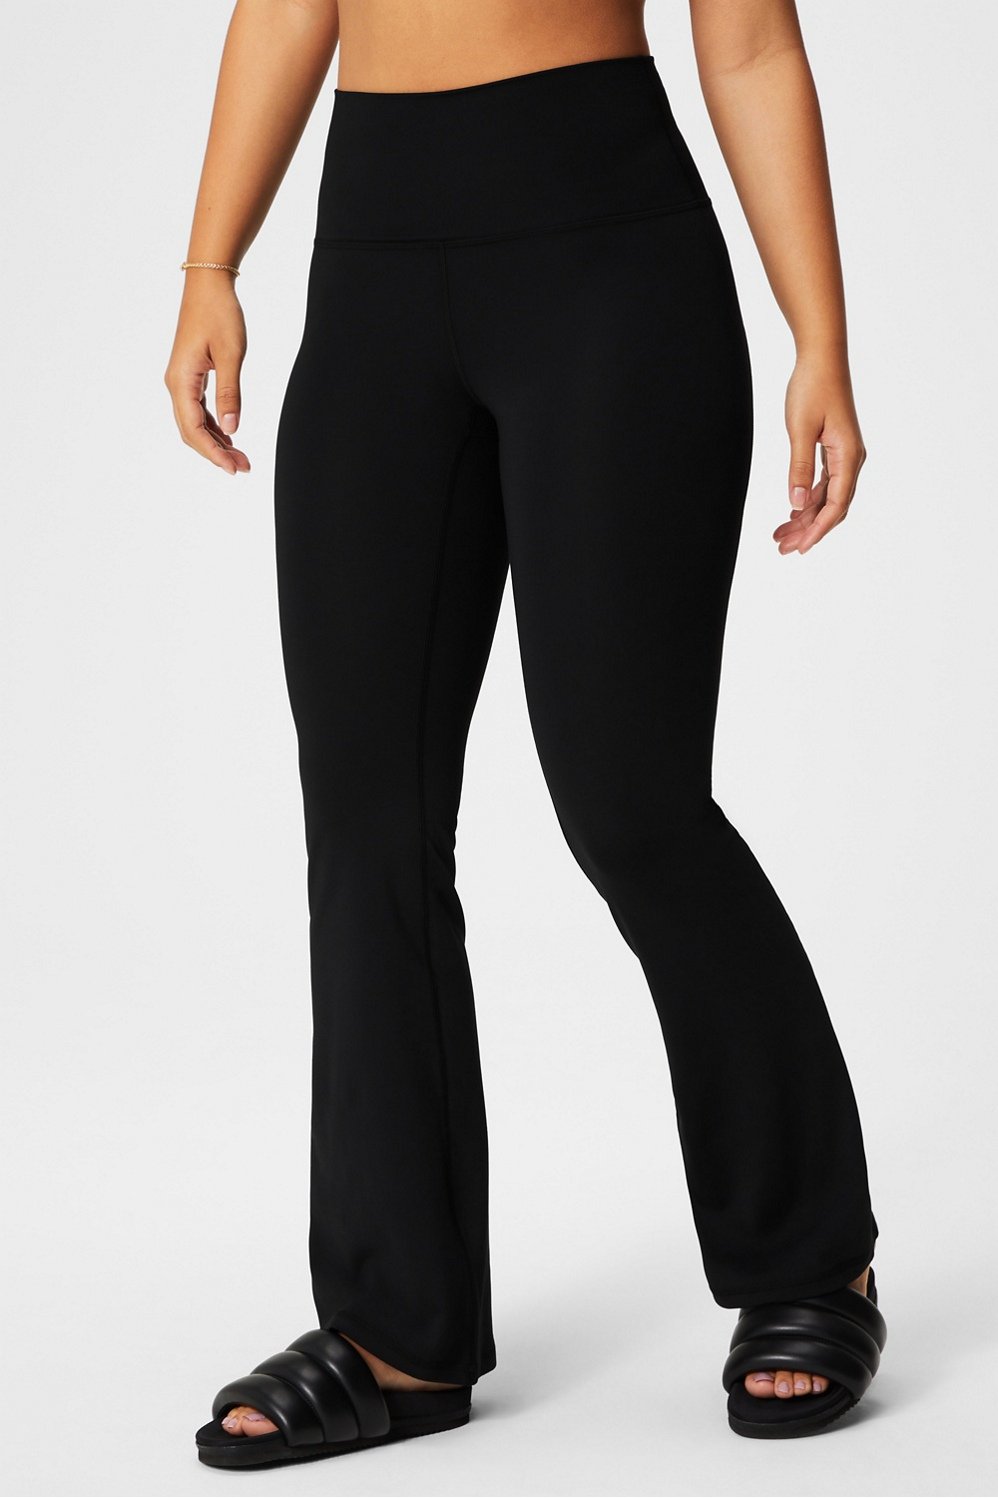 flare workout pants